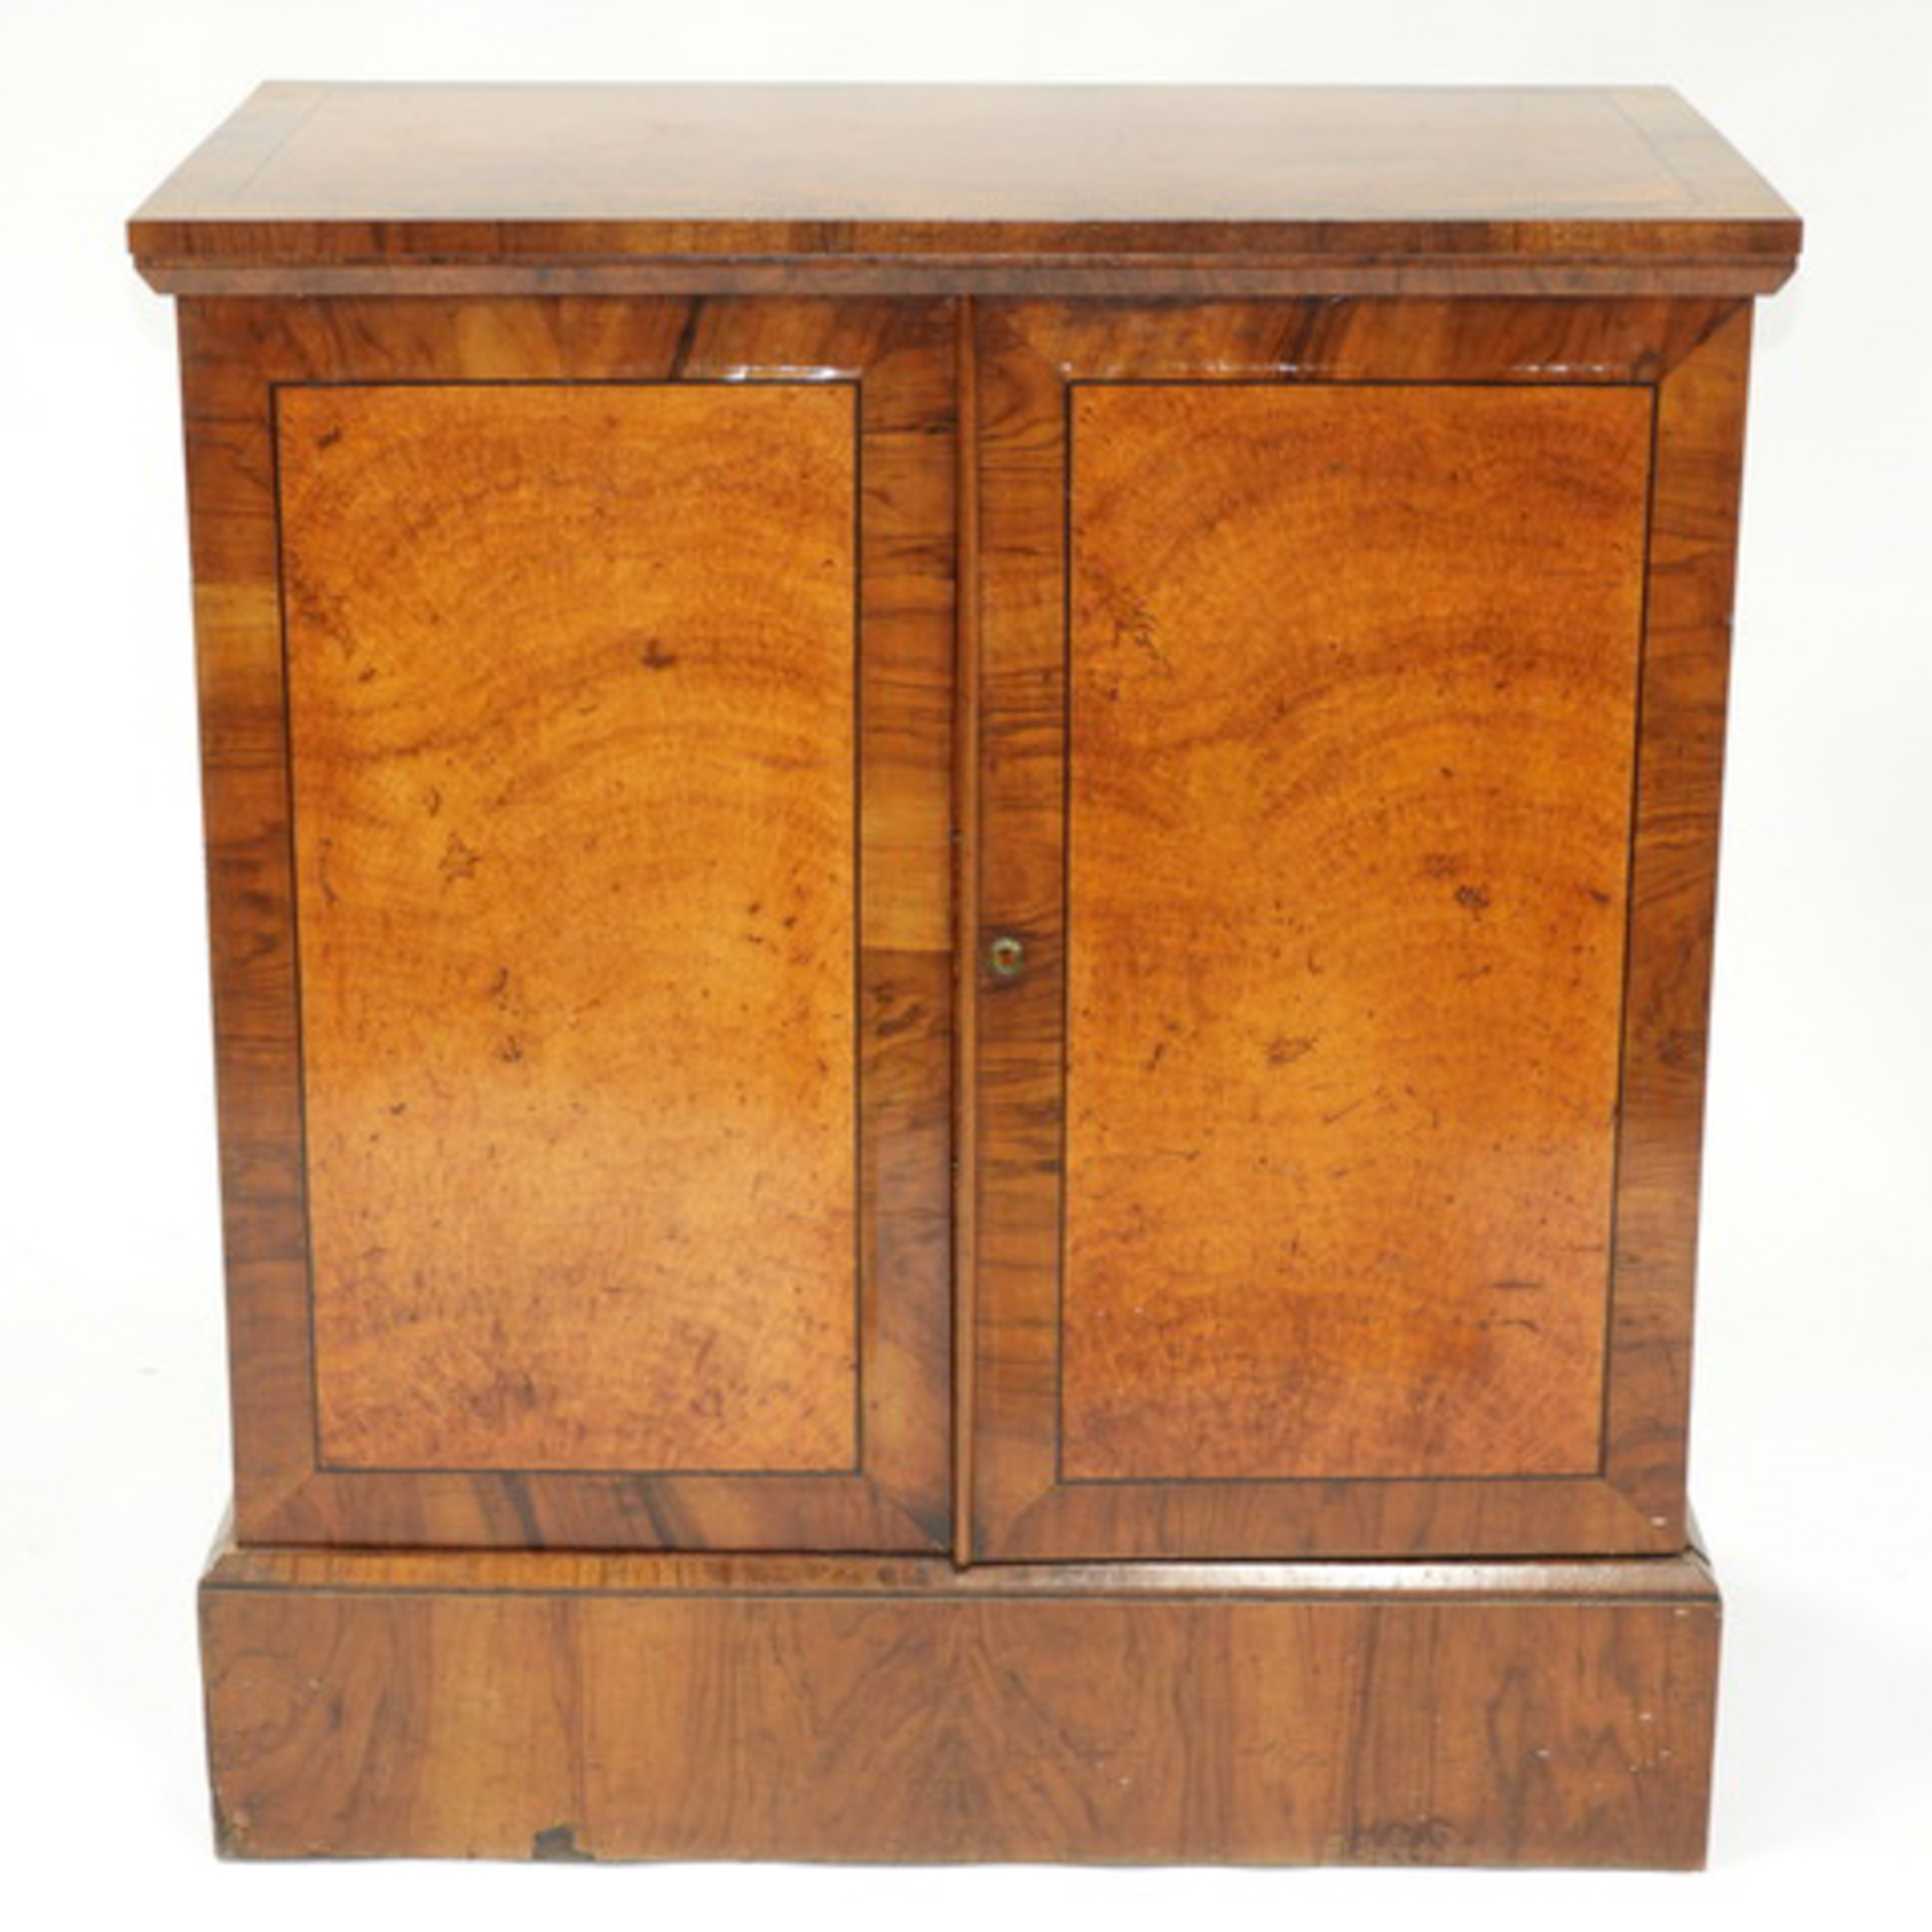 Rosewood and Burl Walnut Chest 3ac5f9